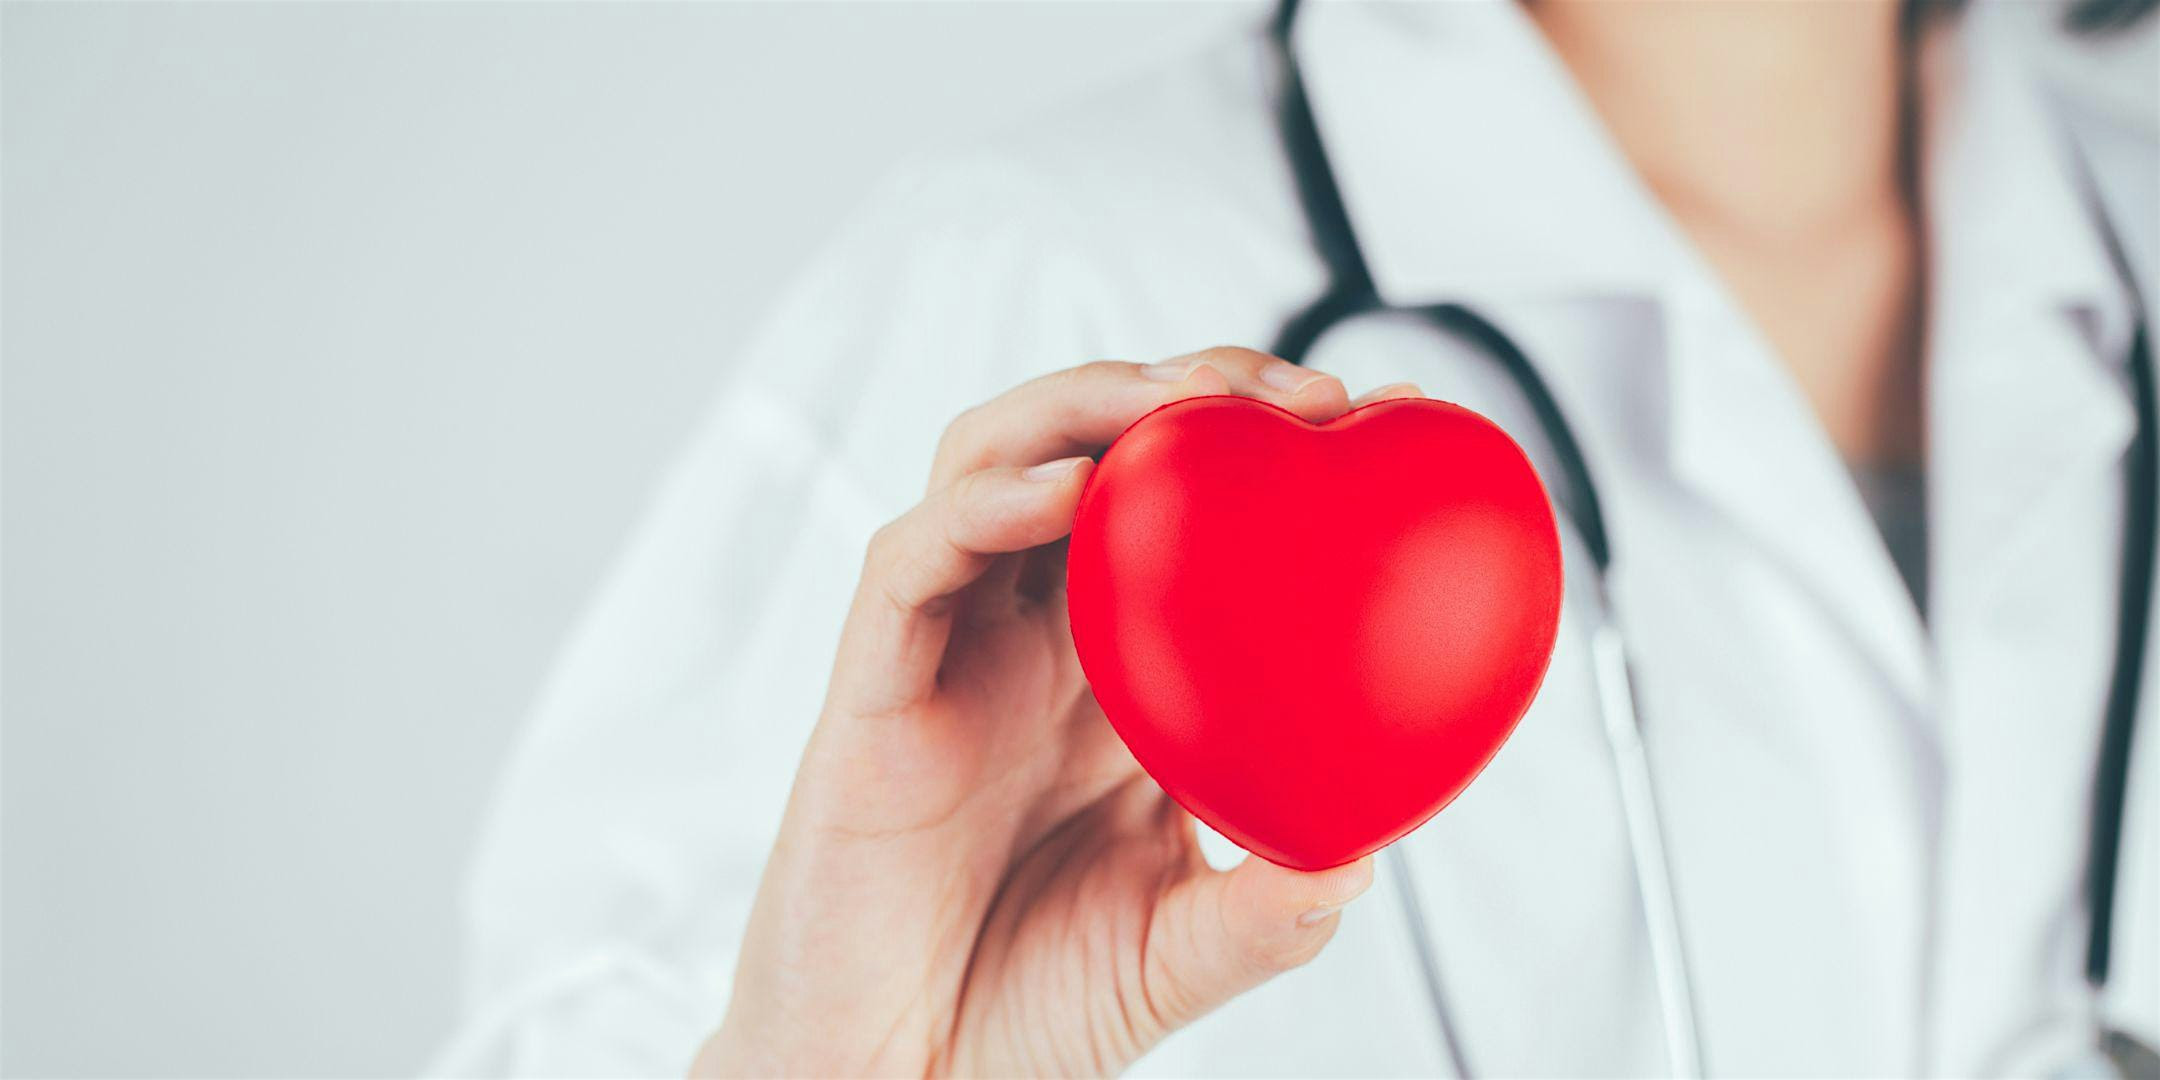 A New Model of Heart Care